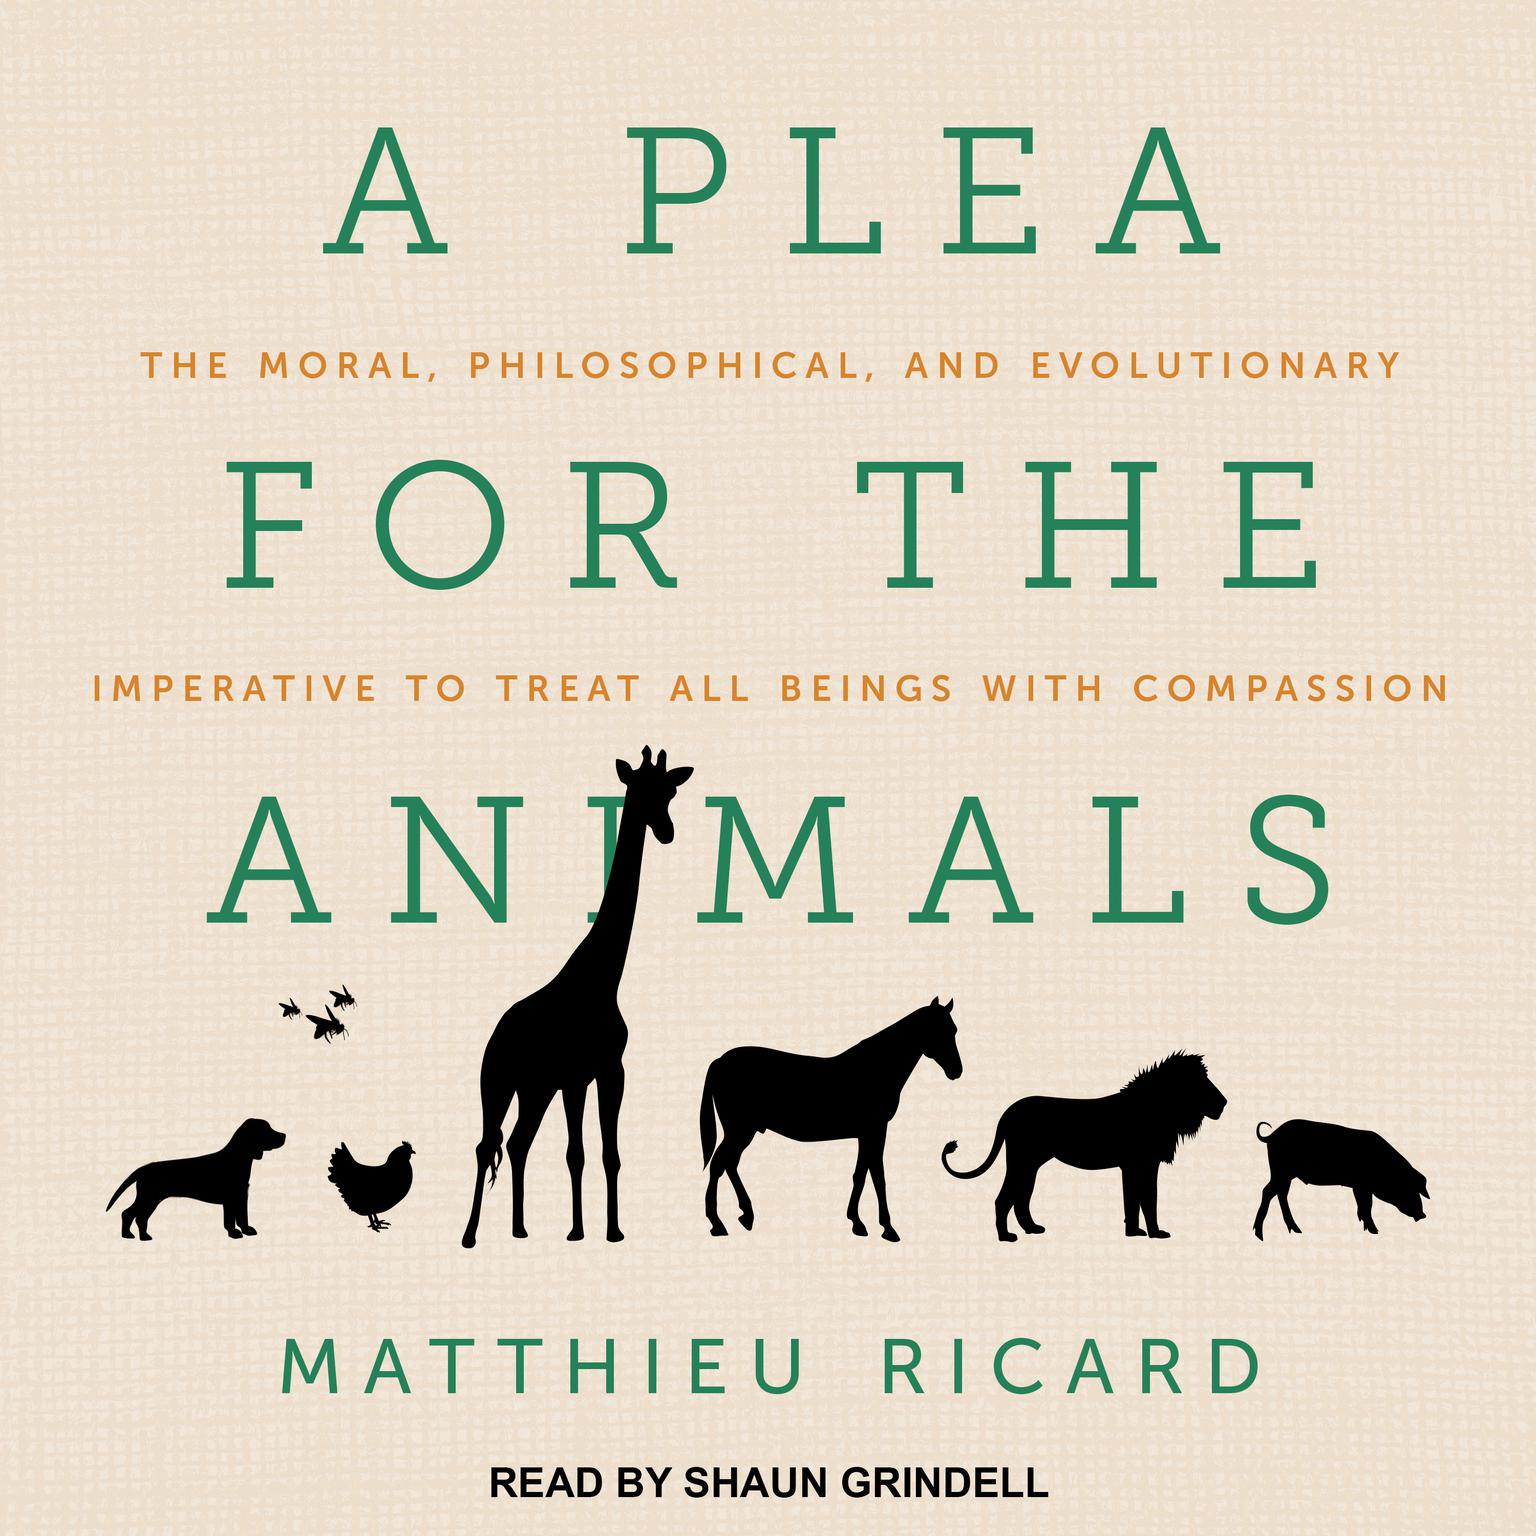 A Plea for the Animals: The Moral, Philosophical, and Evolutionary Imperative to Treat All Beings with Compassion Audiobook, by Matthieu Ricard